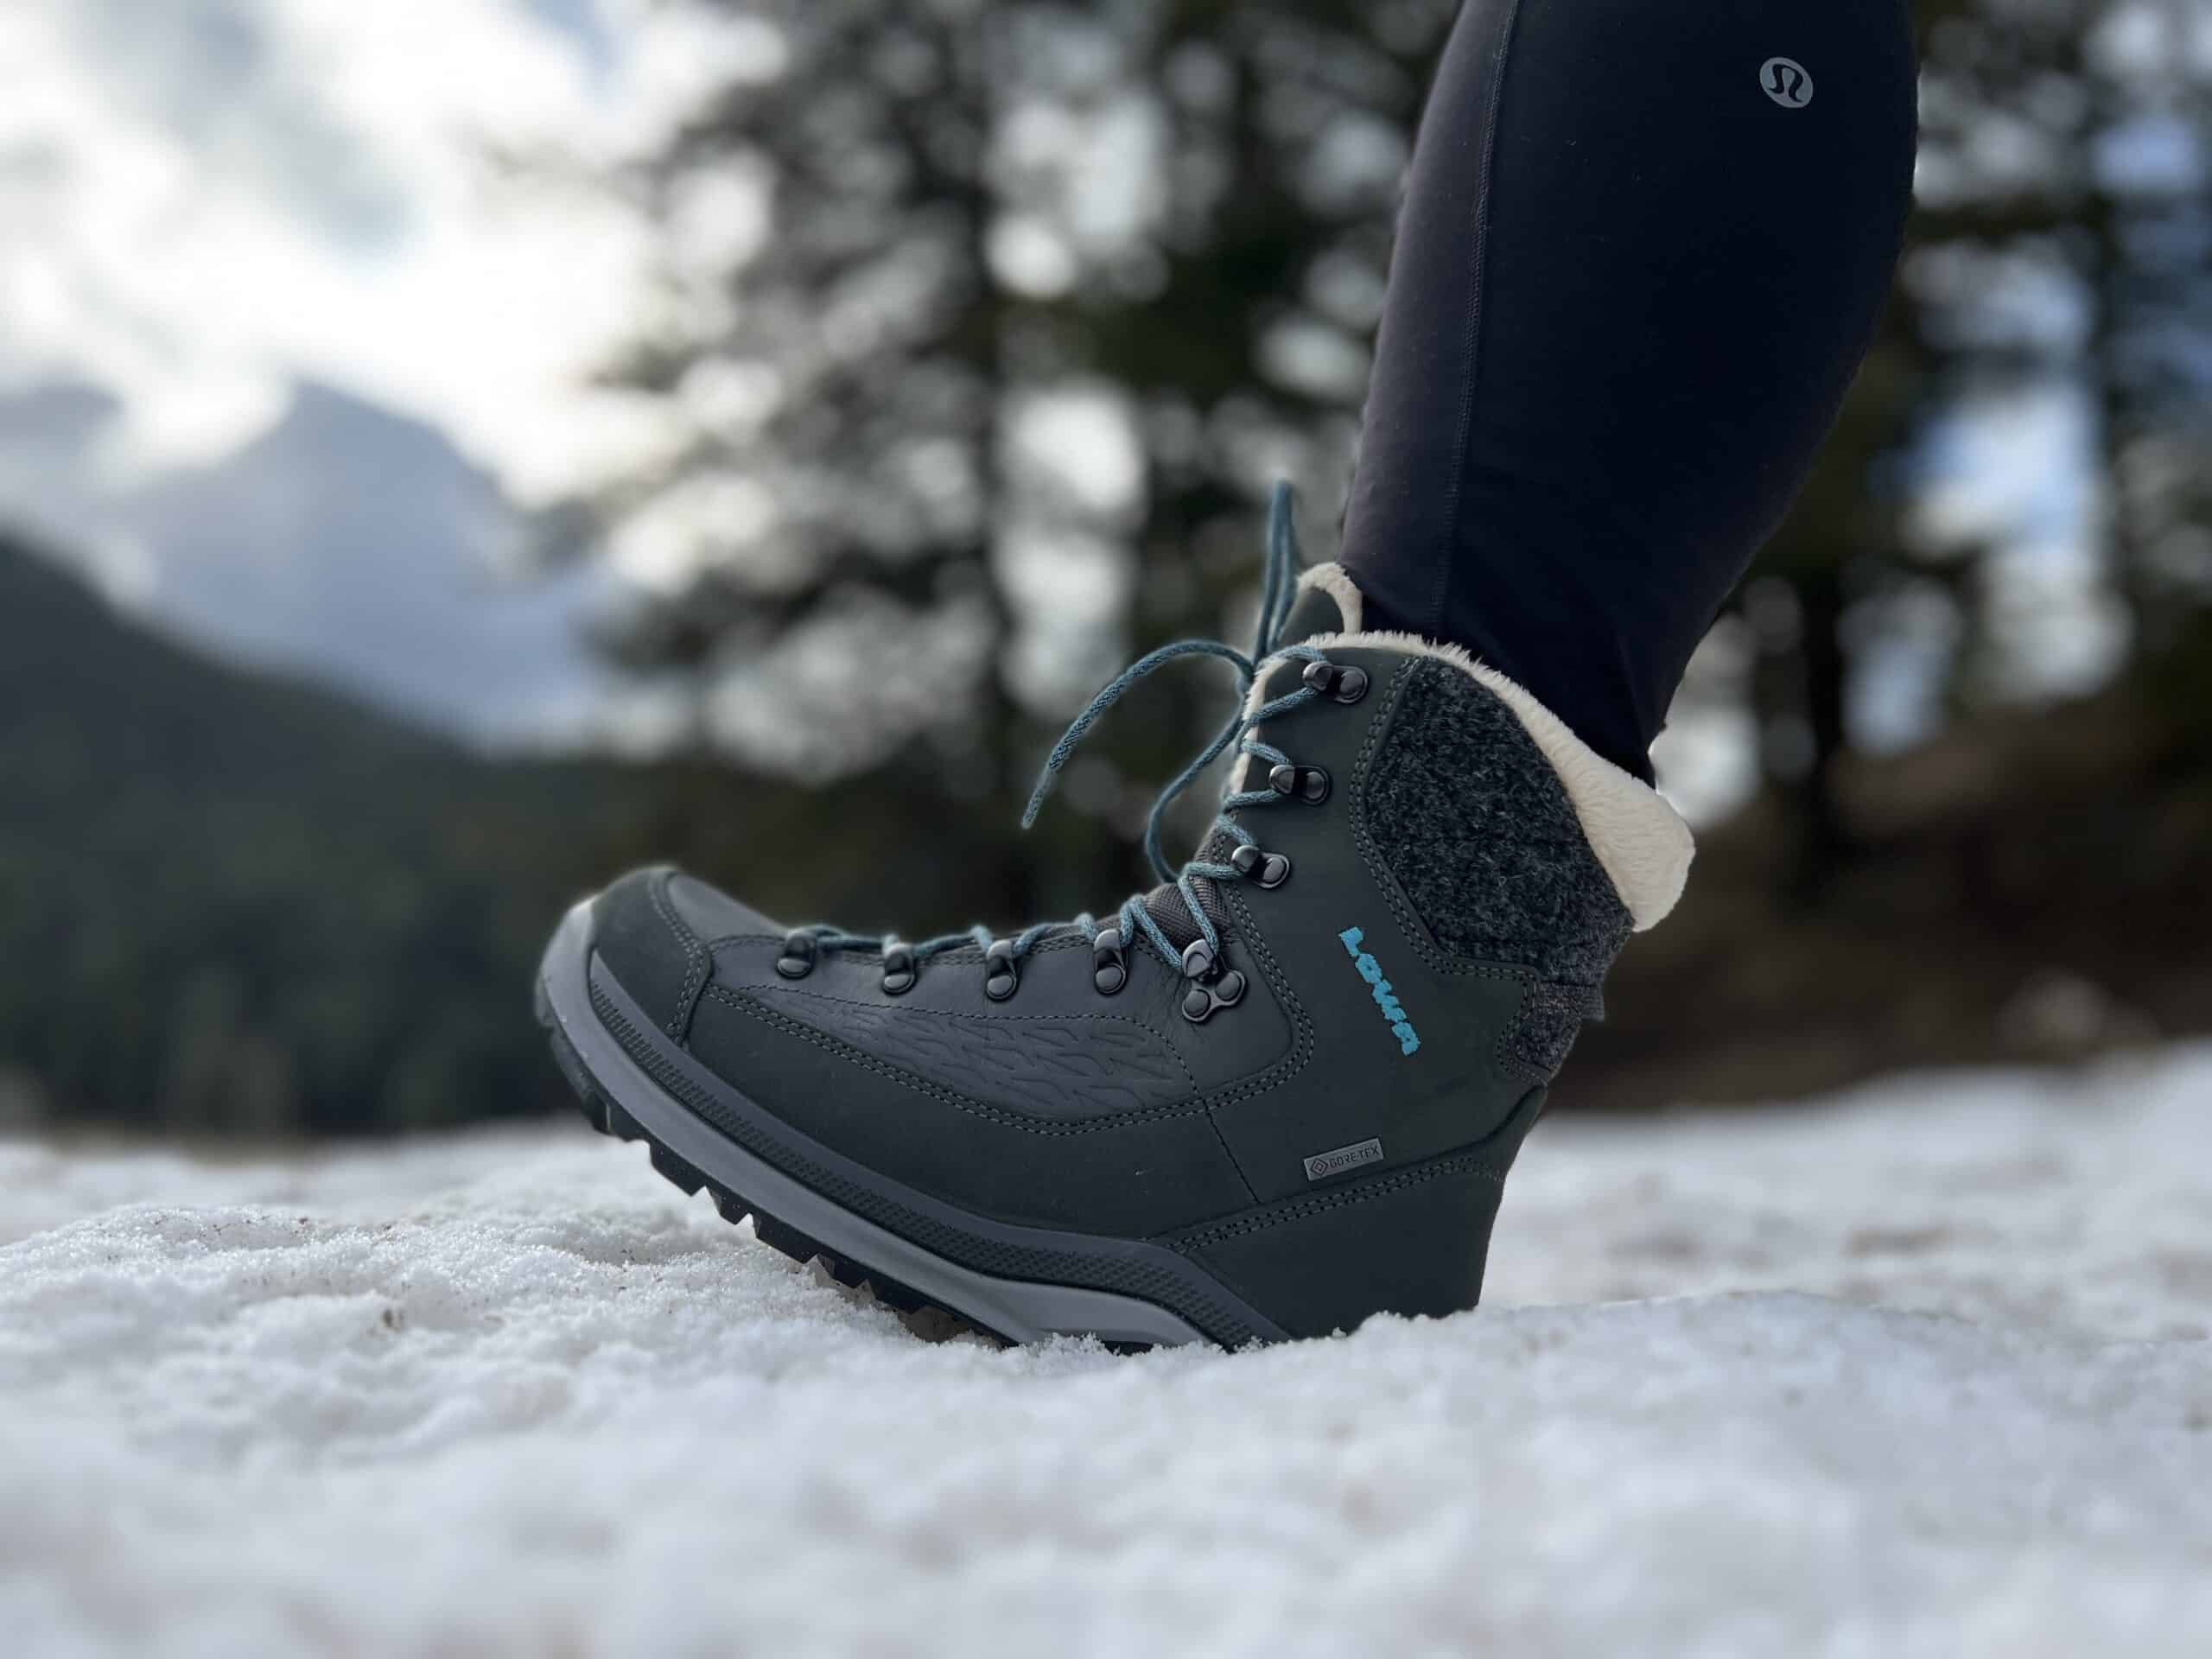 LOWA boots: Comfort and stability for outdoor reporters